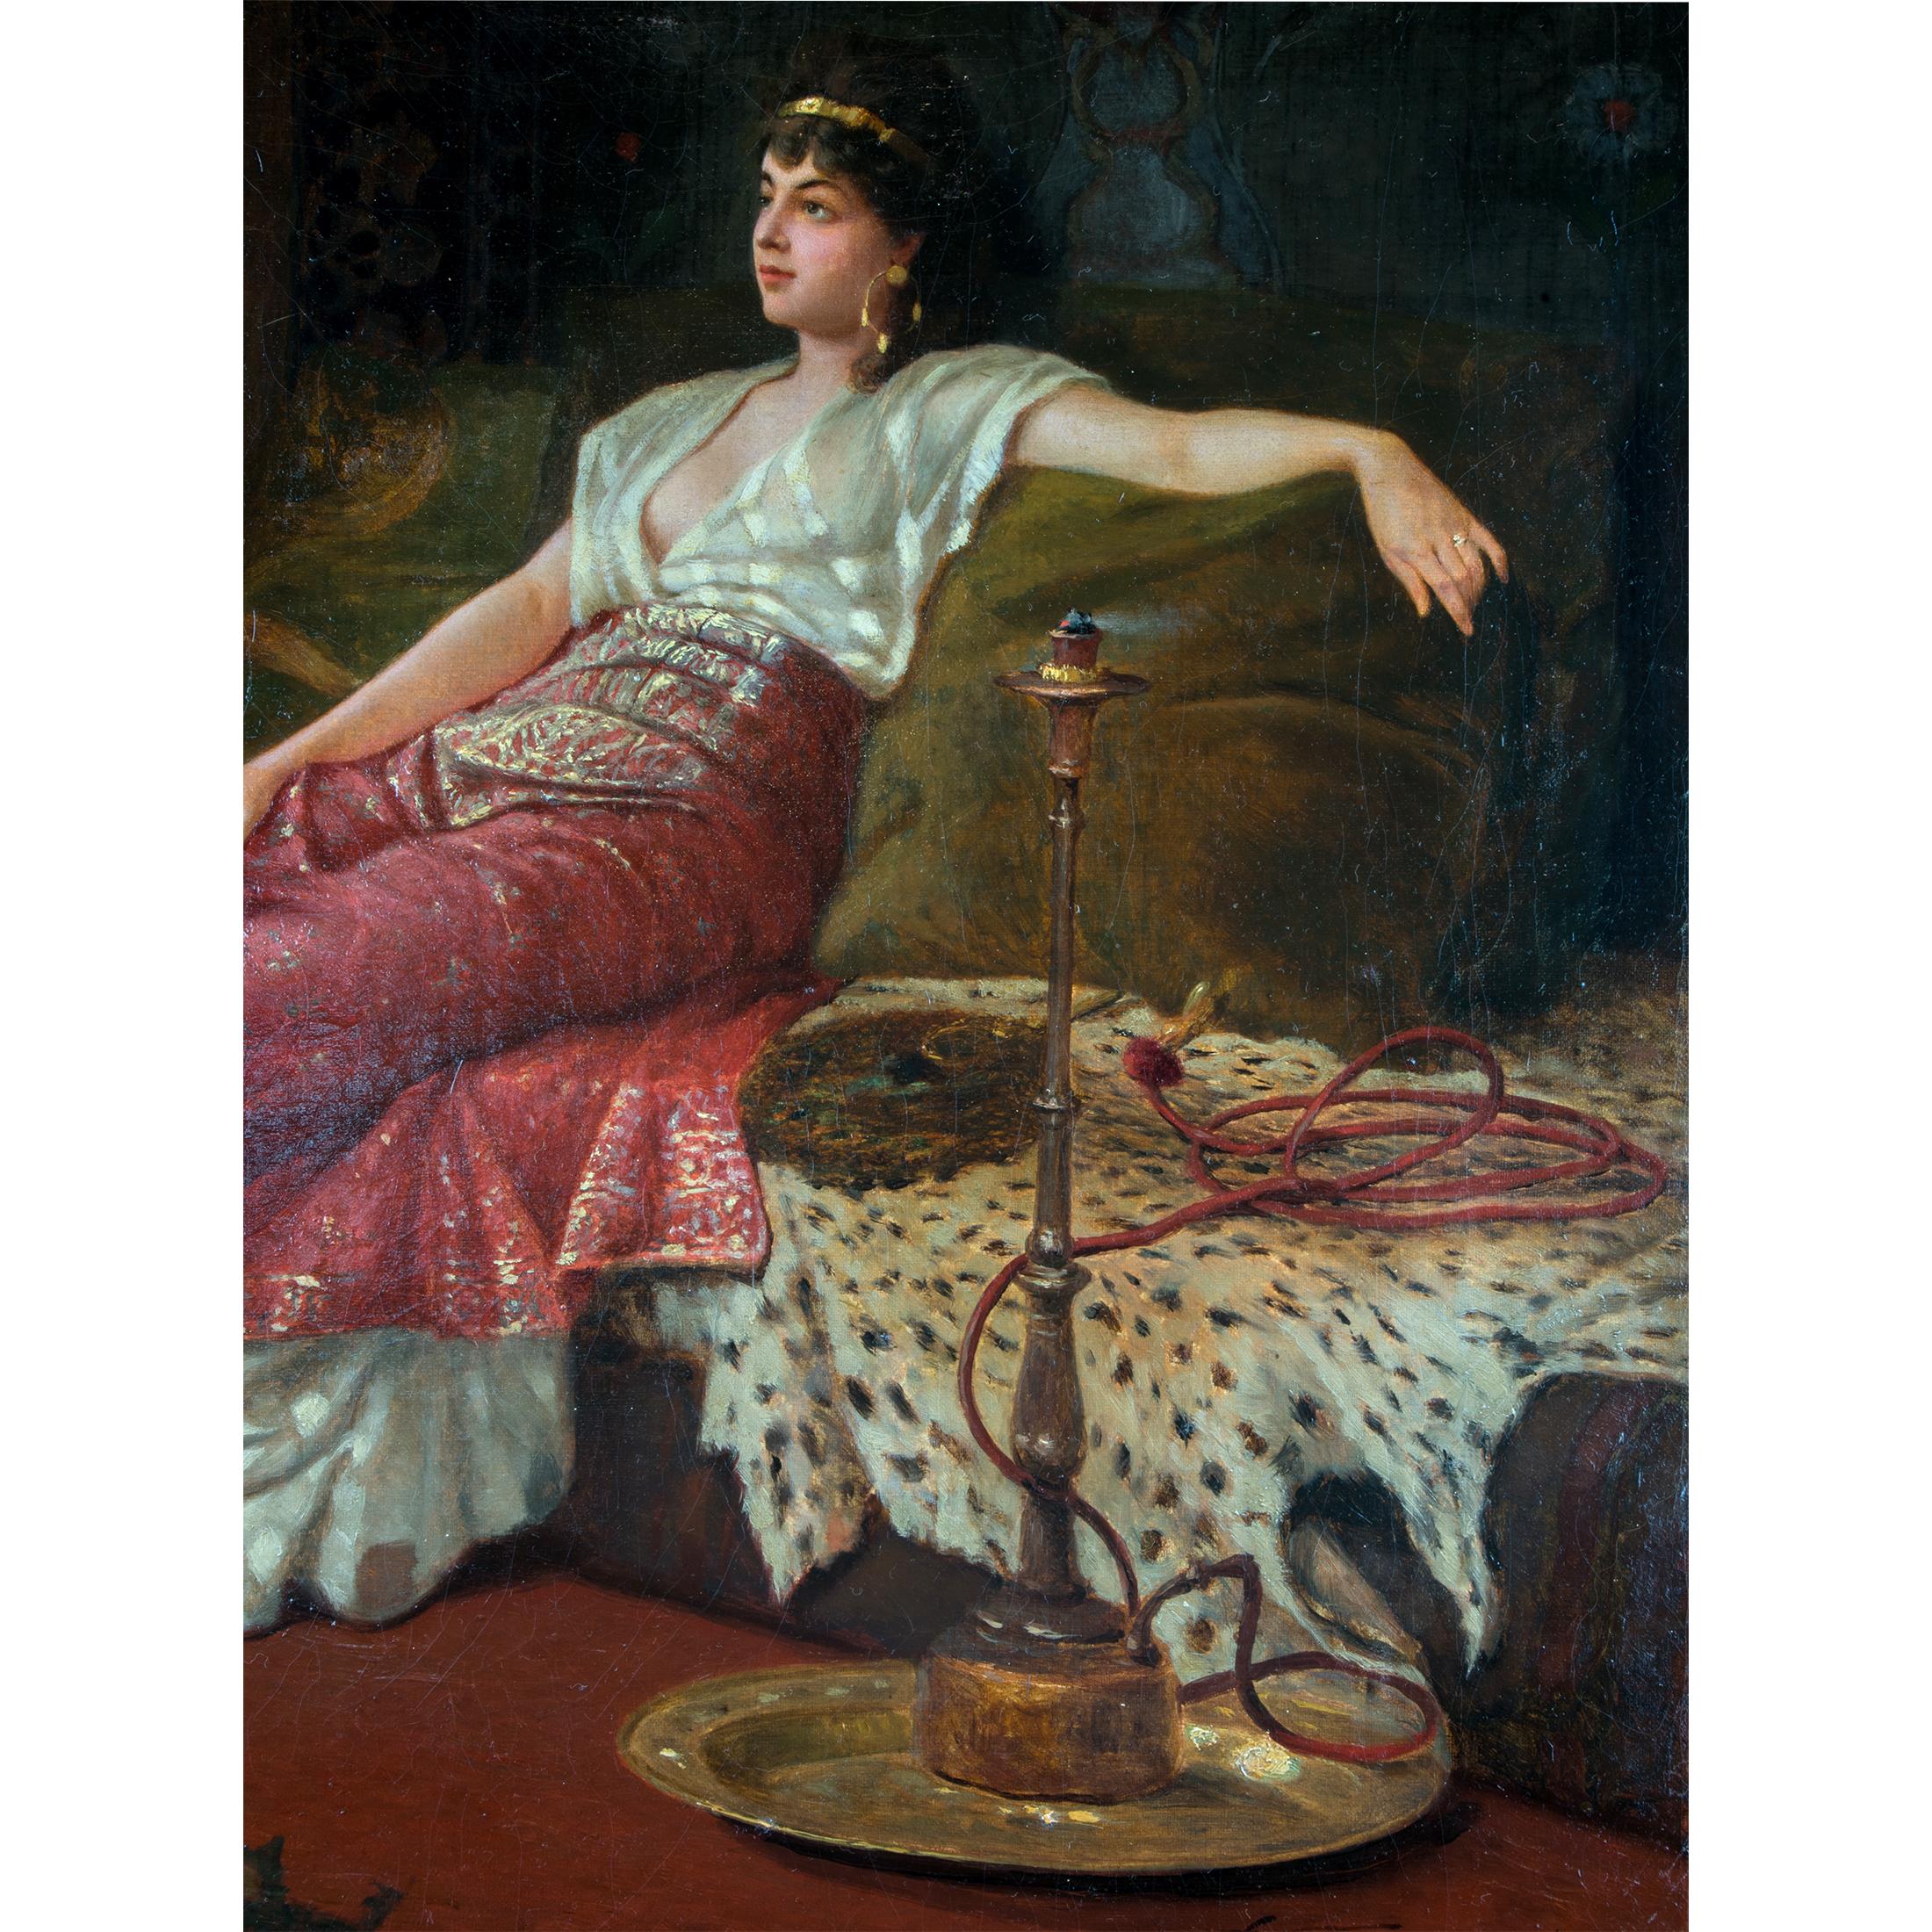 A Fine Stiepevich Orientalist Painting of a Lounging Odalisque in the Harem - Brown Portrait Painting by Vincent G. Stiepevich